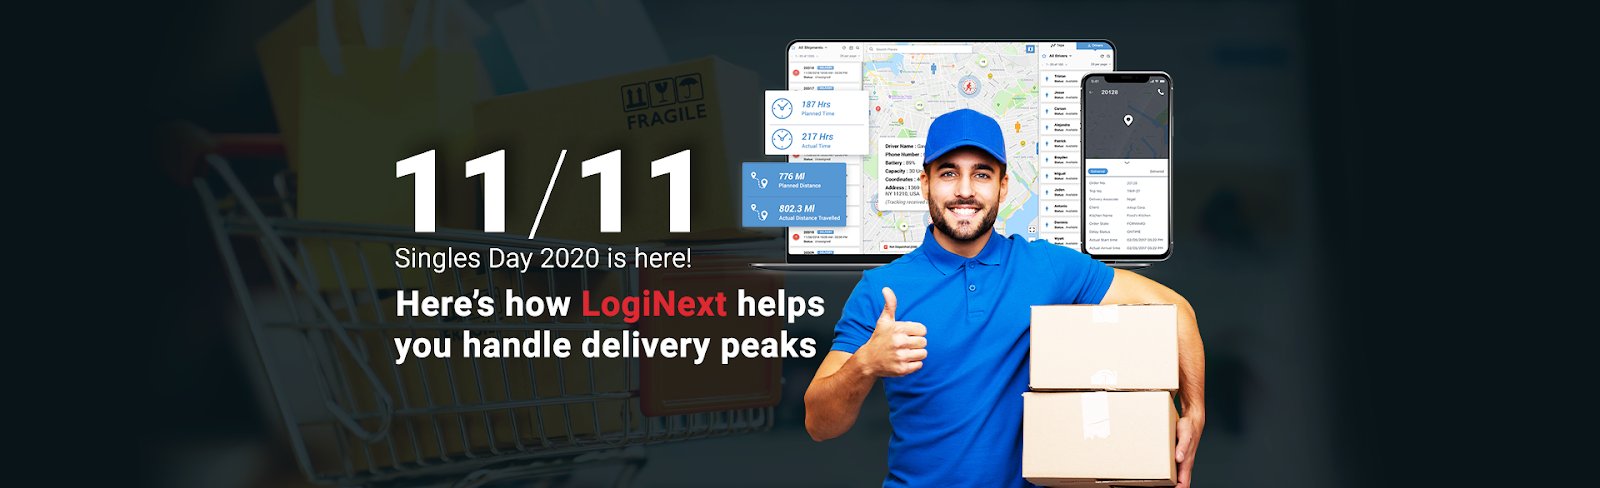 11/11 Singles’ Day 2020 is here! Here’s how AI & ML tech can help handle delivery peaks